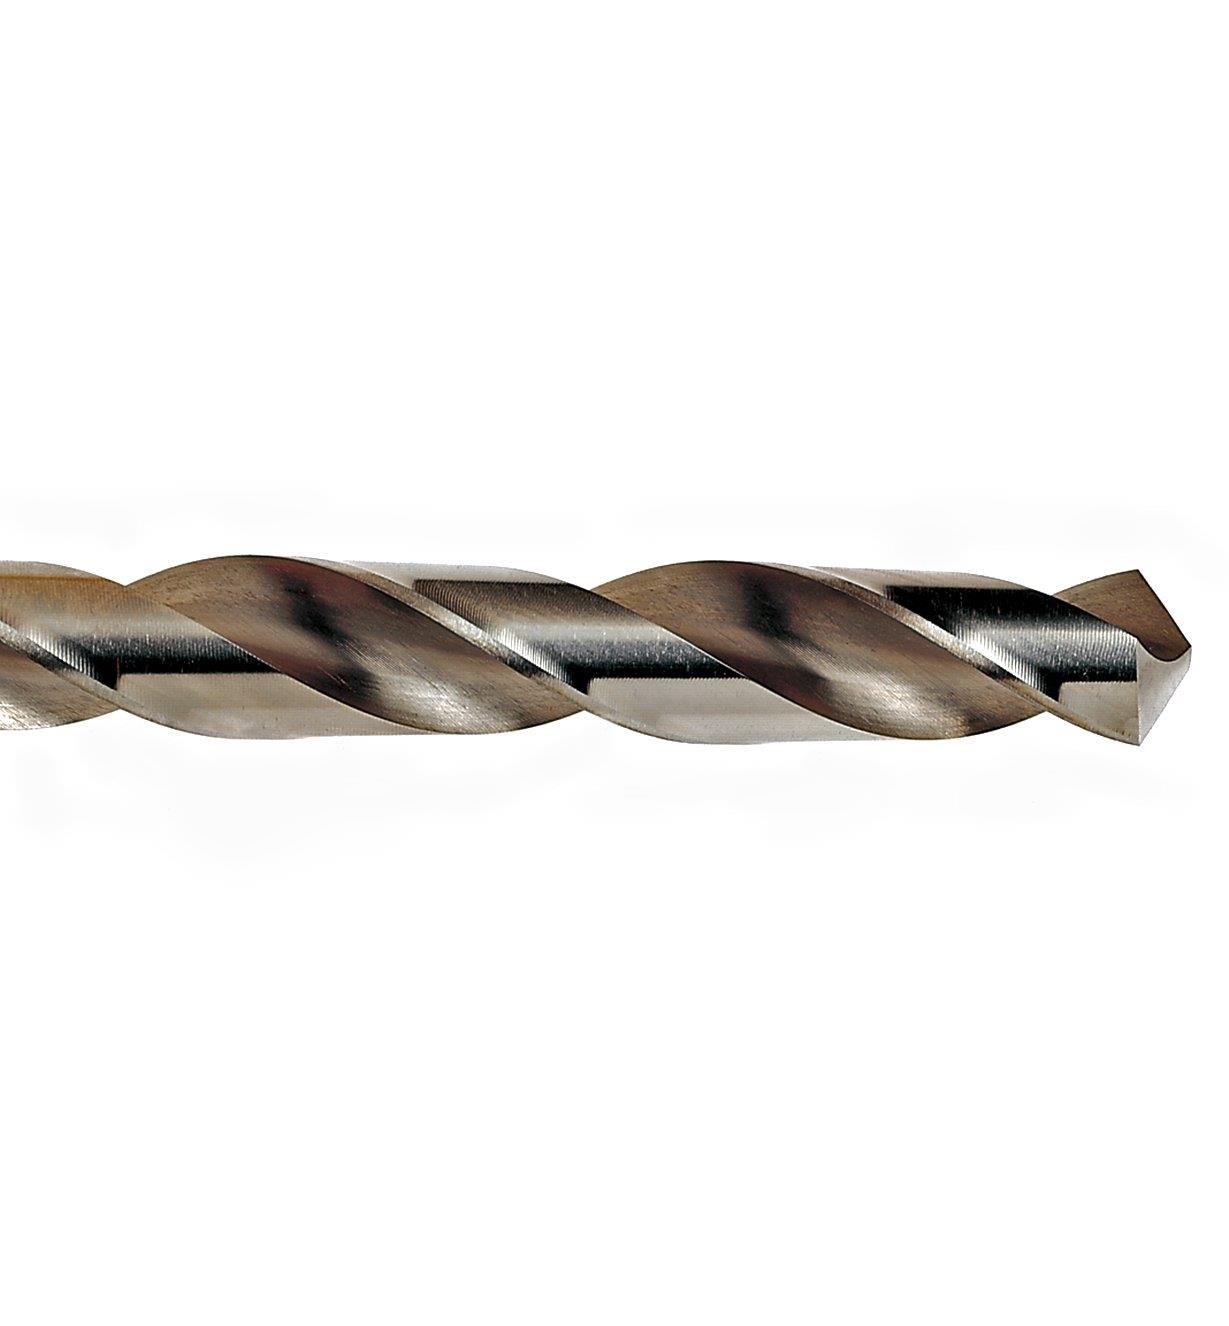 Close-up of drill flute